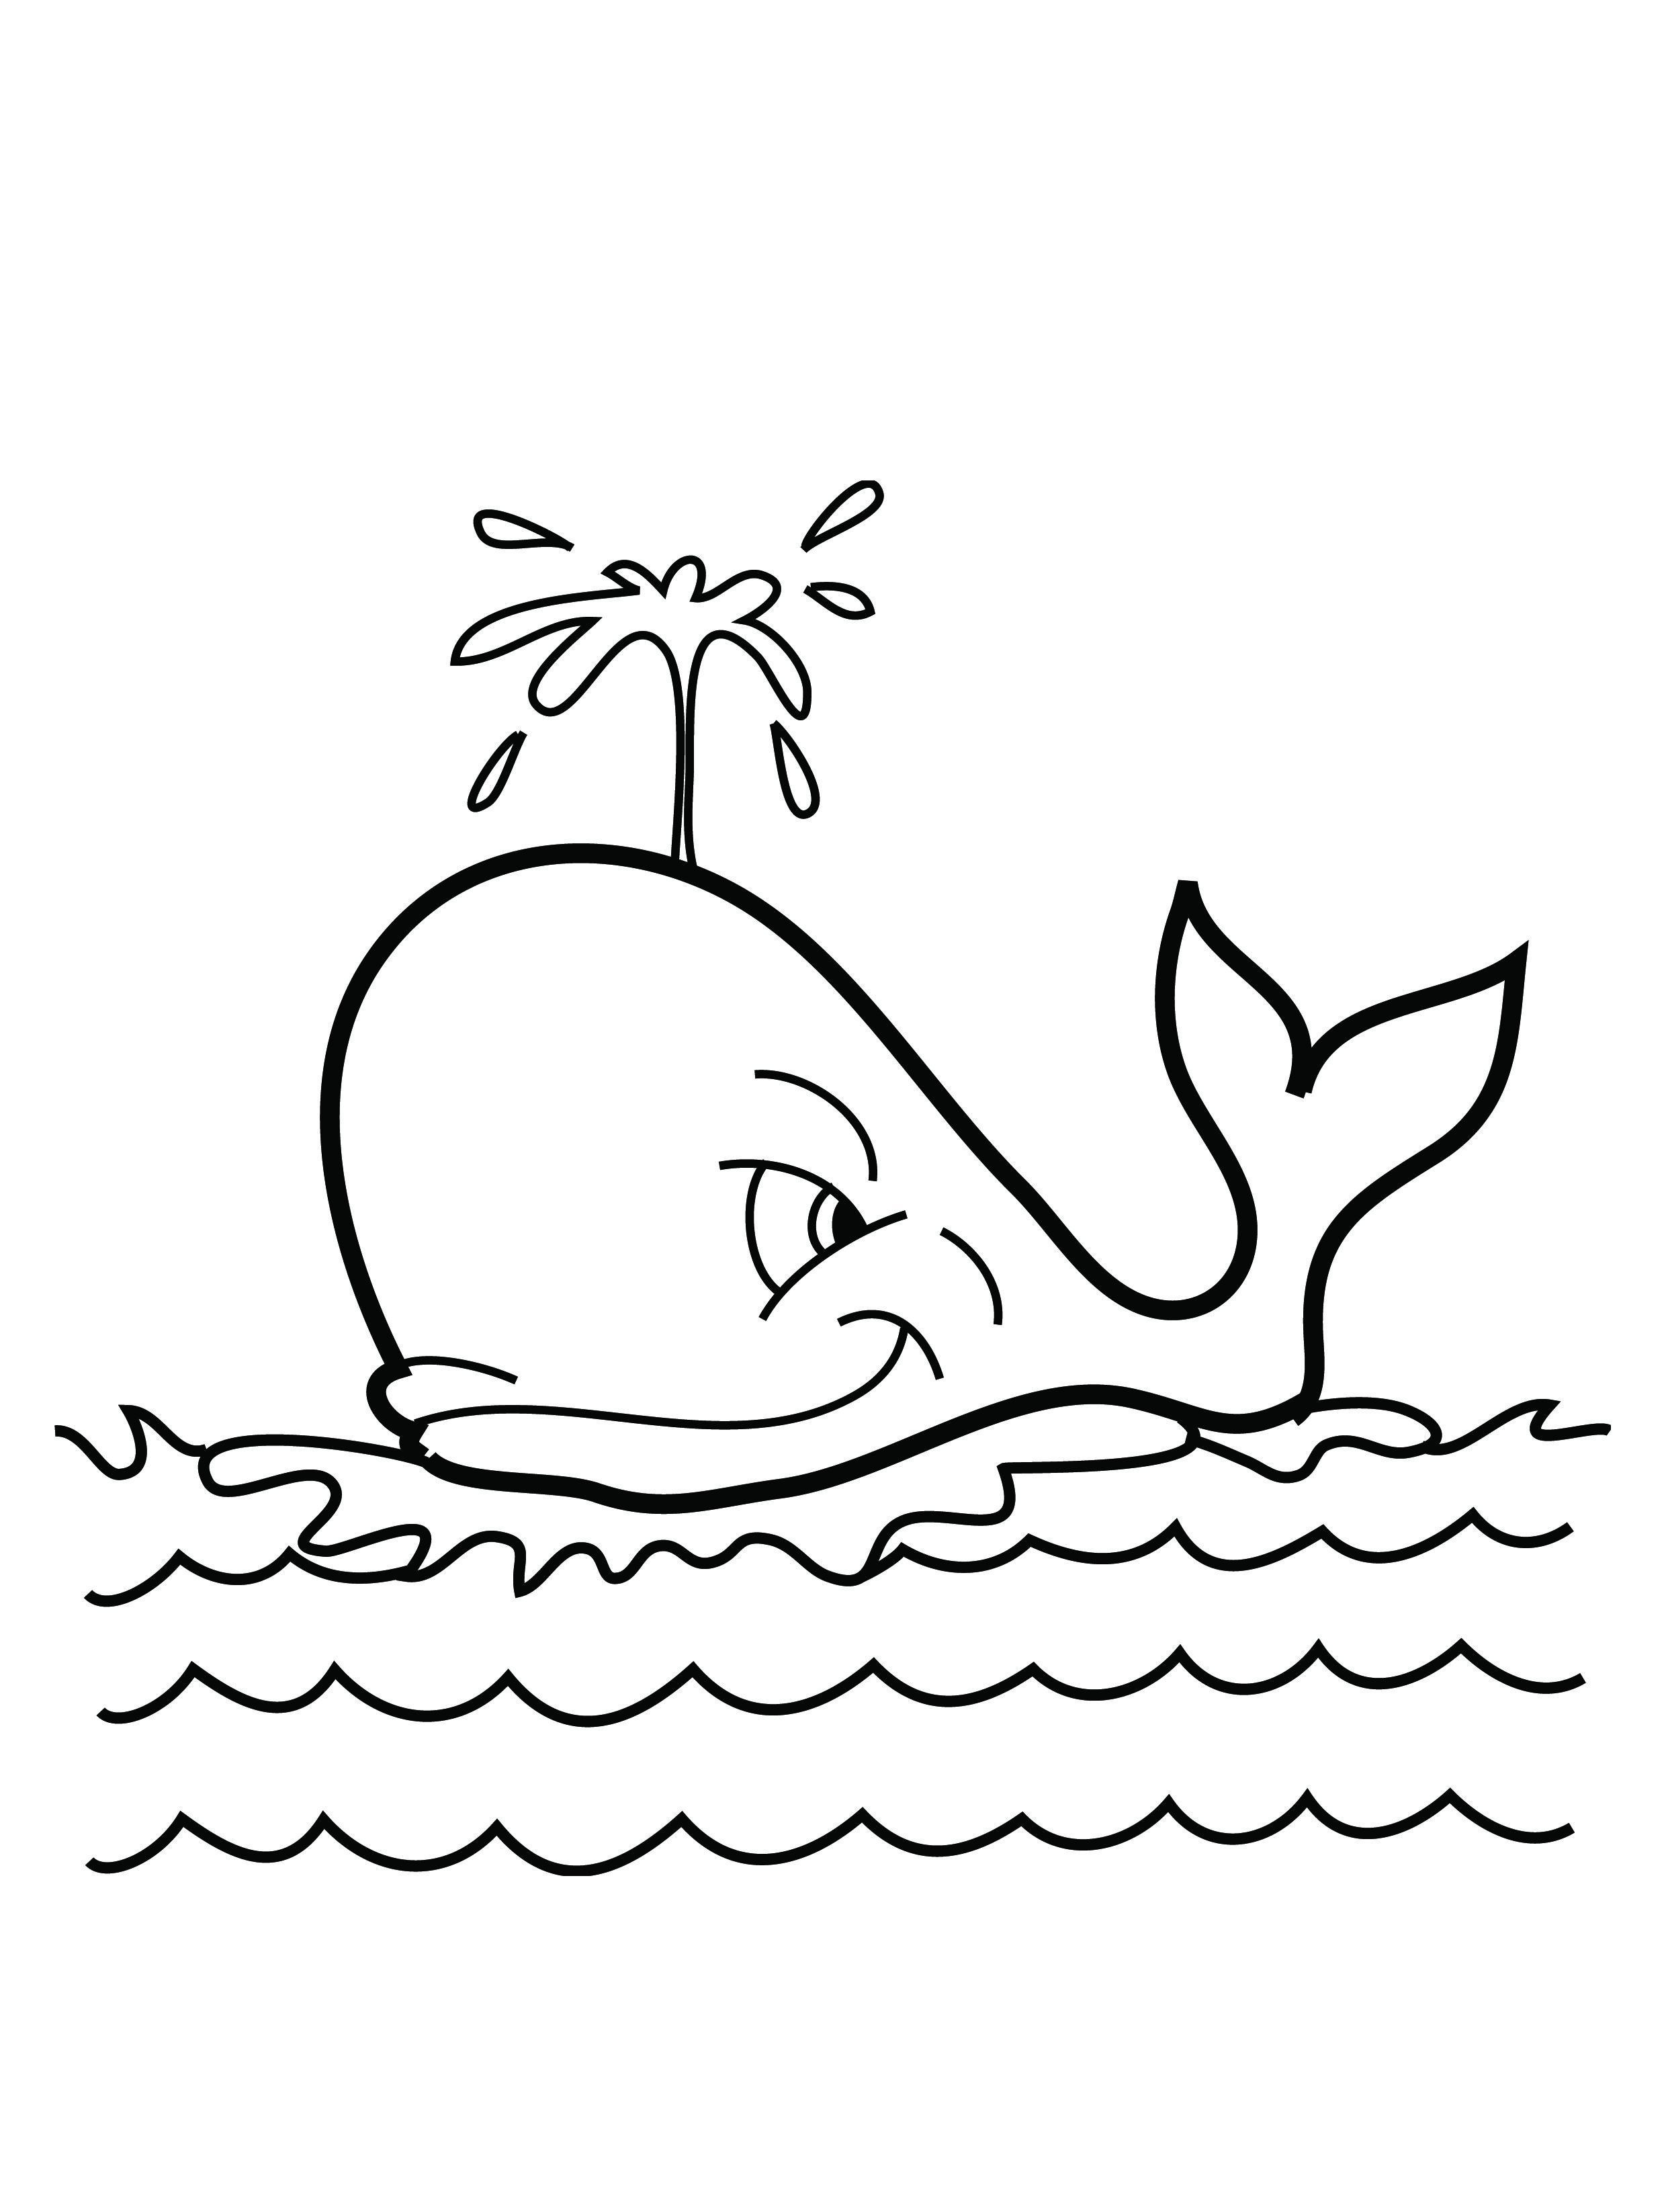 humpback-whales-coloring-pages-coloring-home